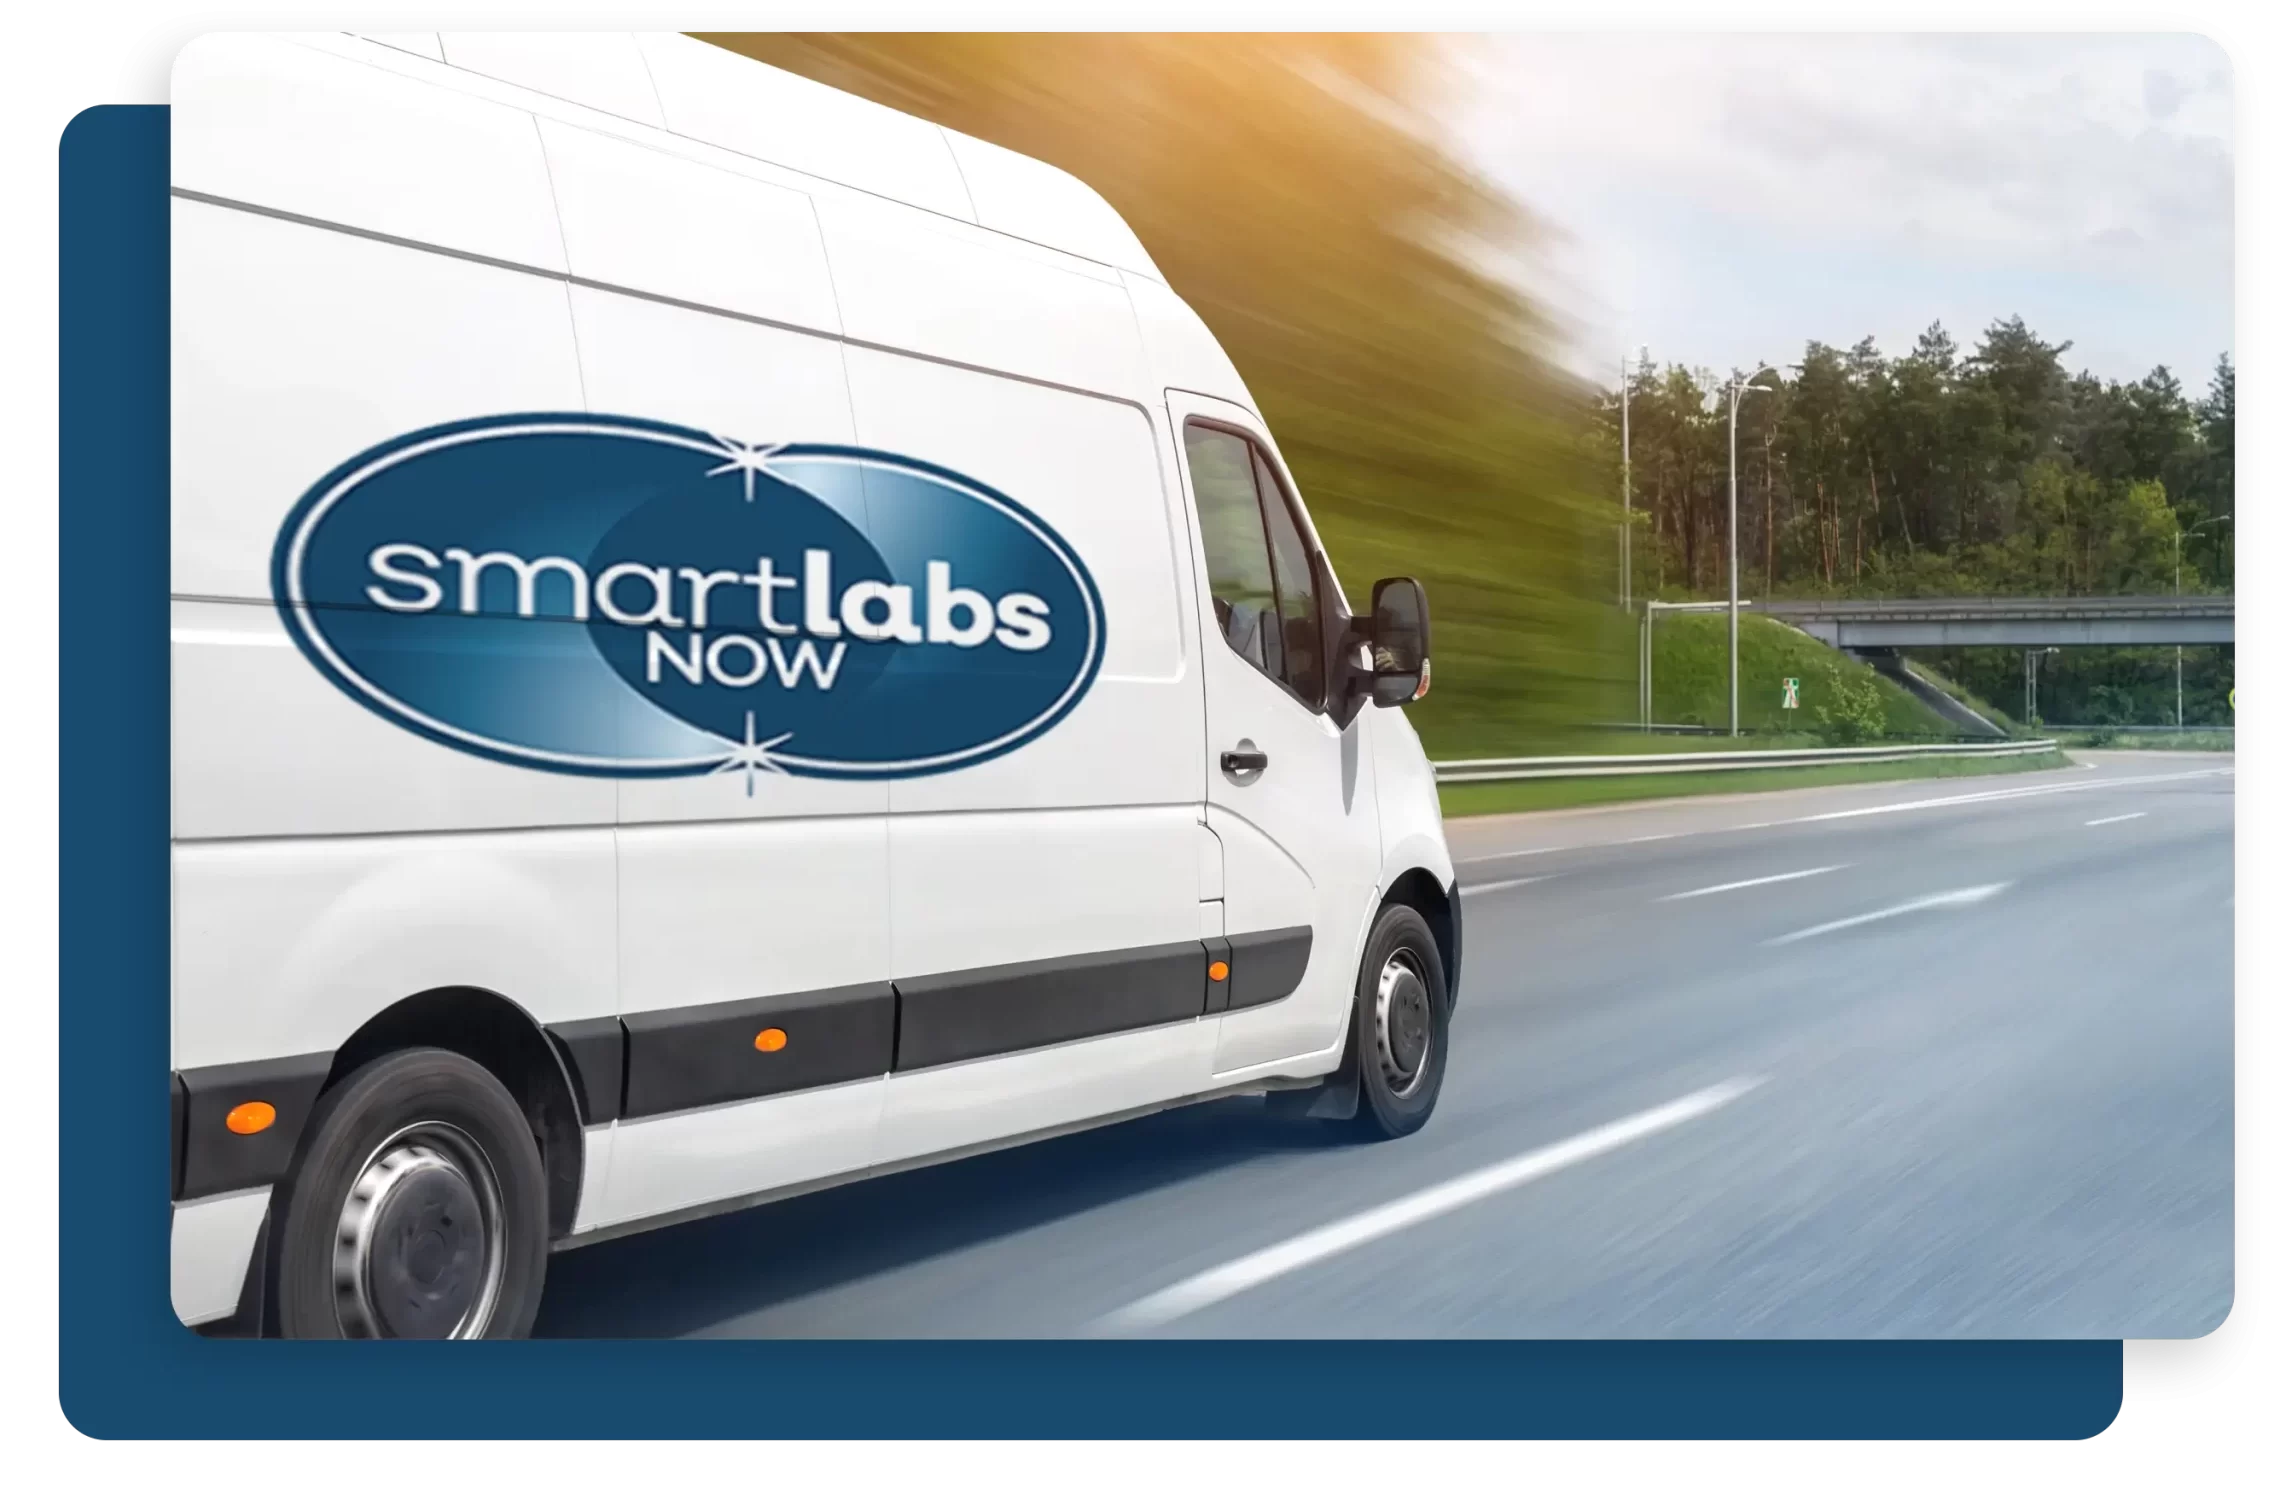 A white van with the Smart Labs Now logo on the side travels to a worksite with lab testing supplies inside.